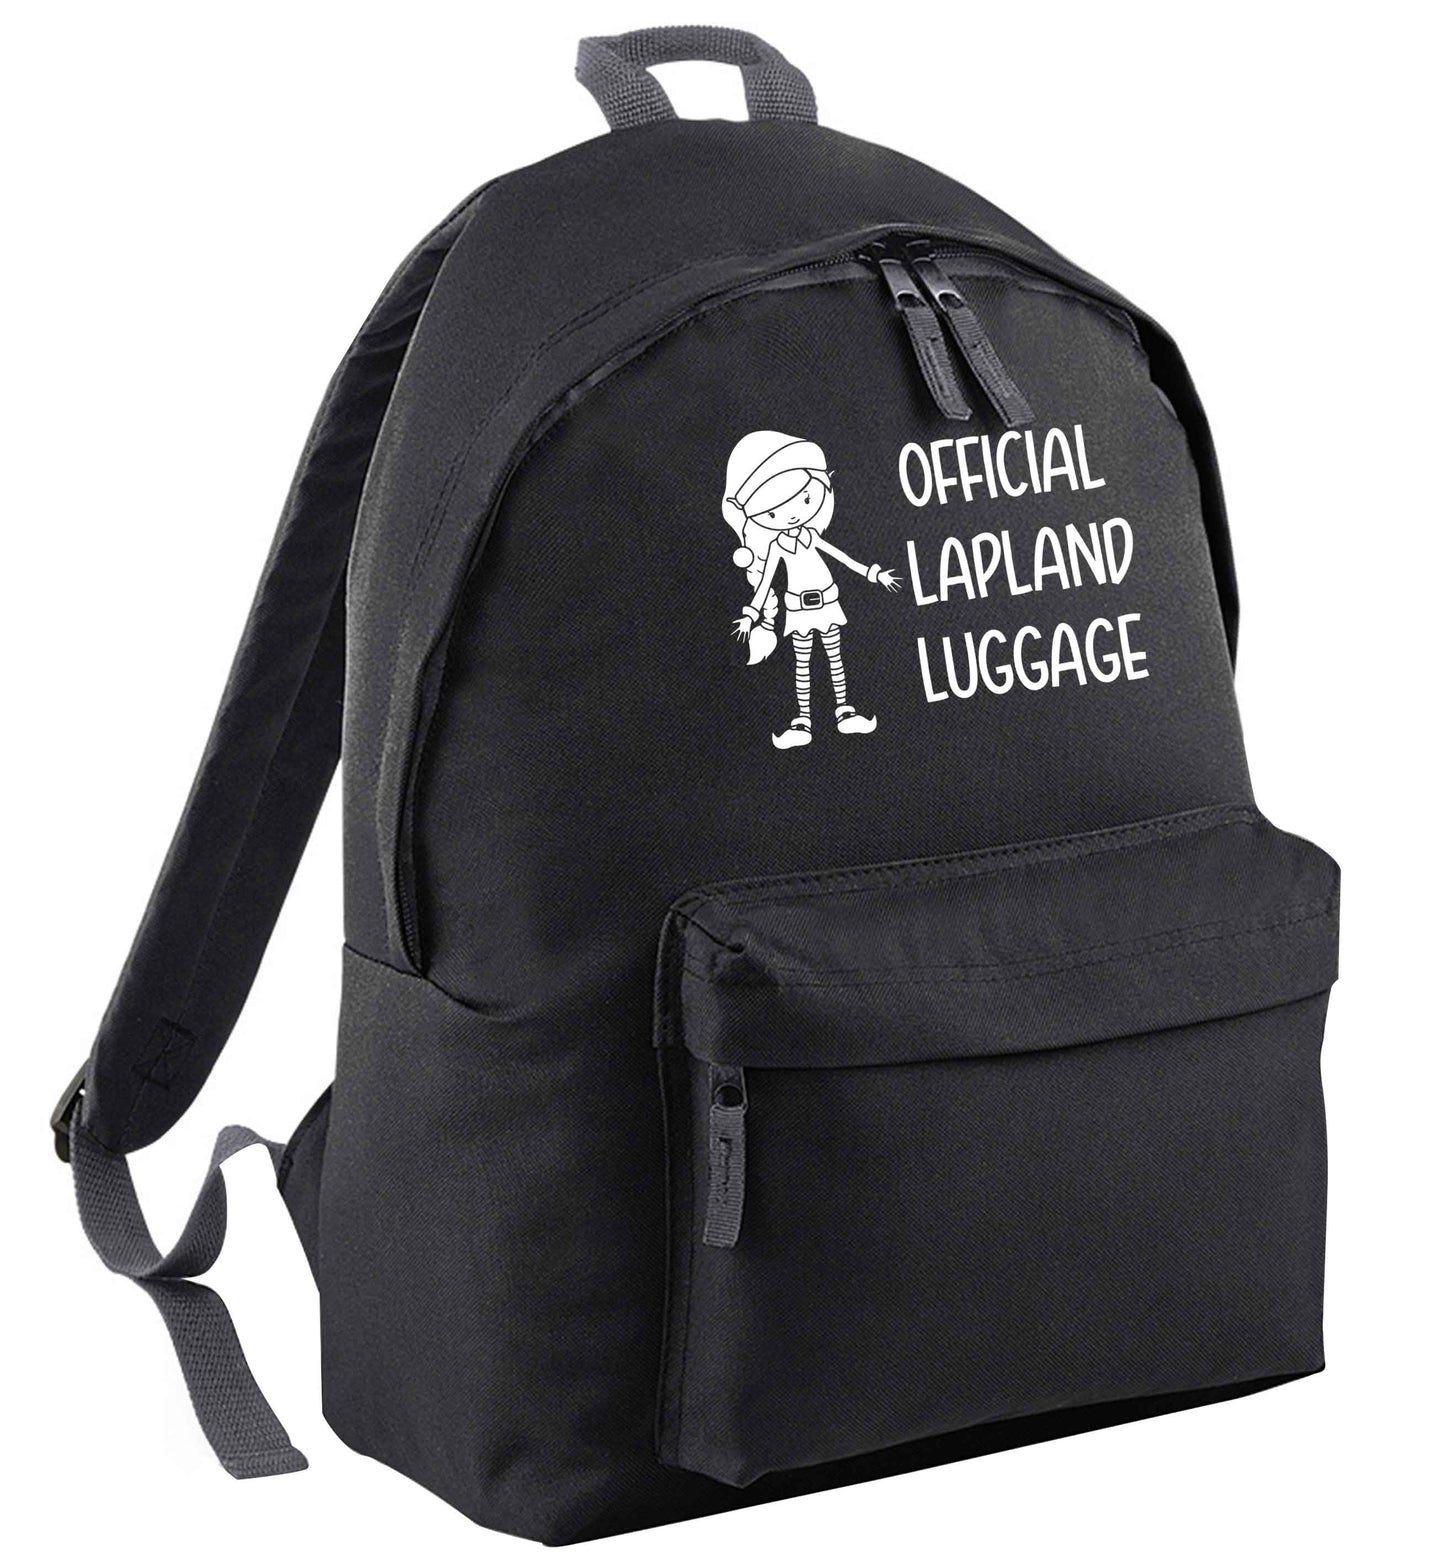 Official lapland luggage - Elf snowflake black adults backpack